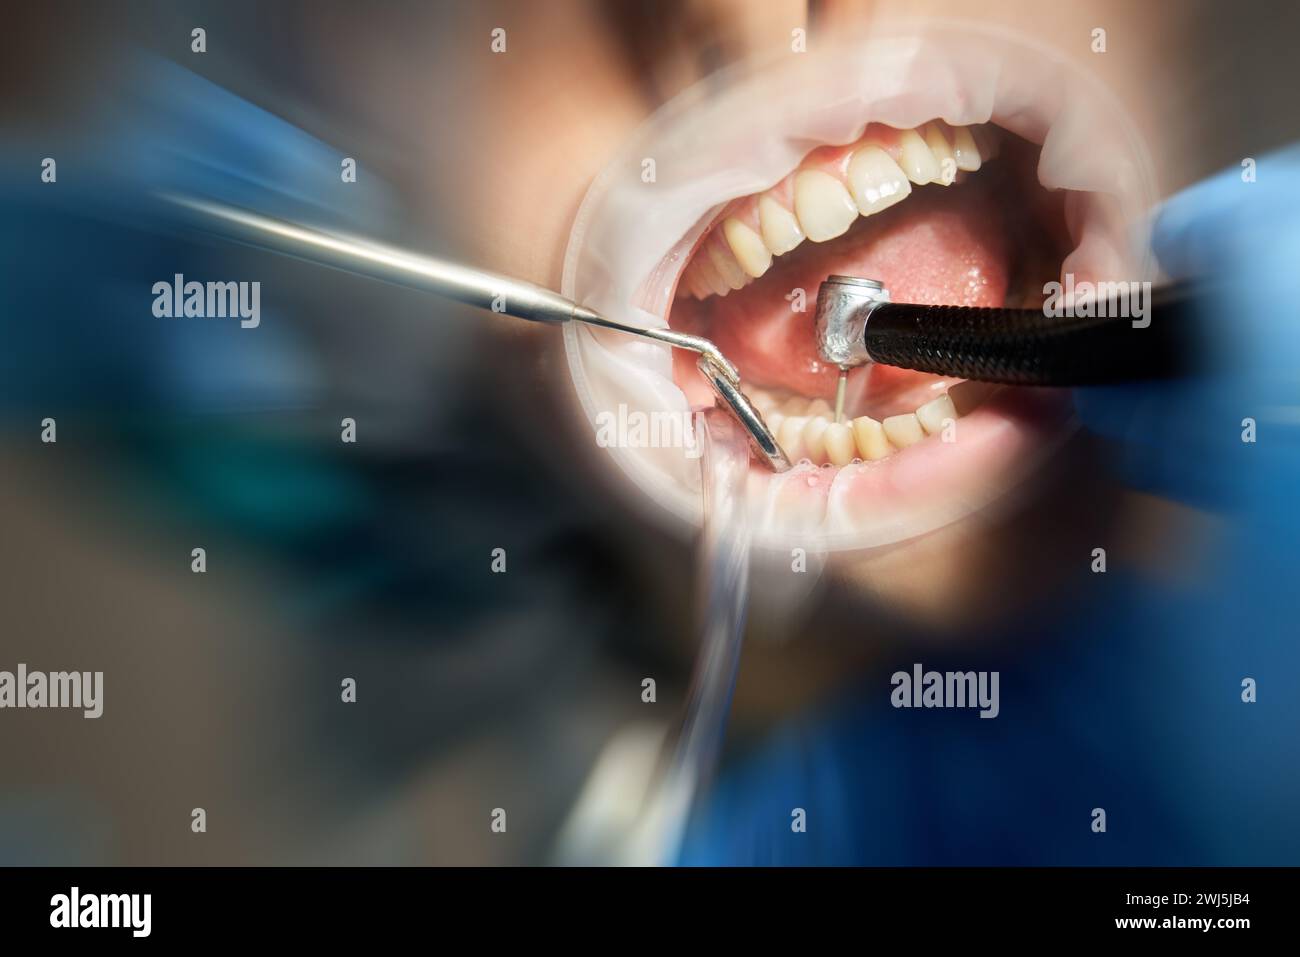 Dentist drilling tooth to male patient in dental chair with motion blur effect Stock Photo